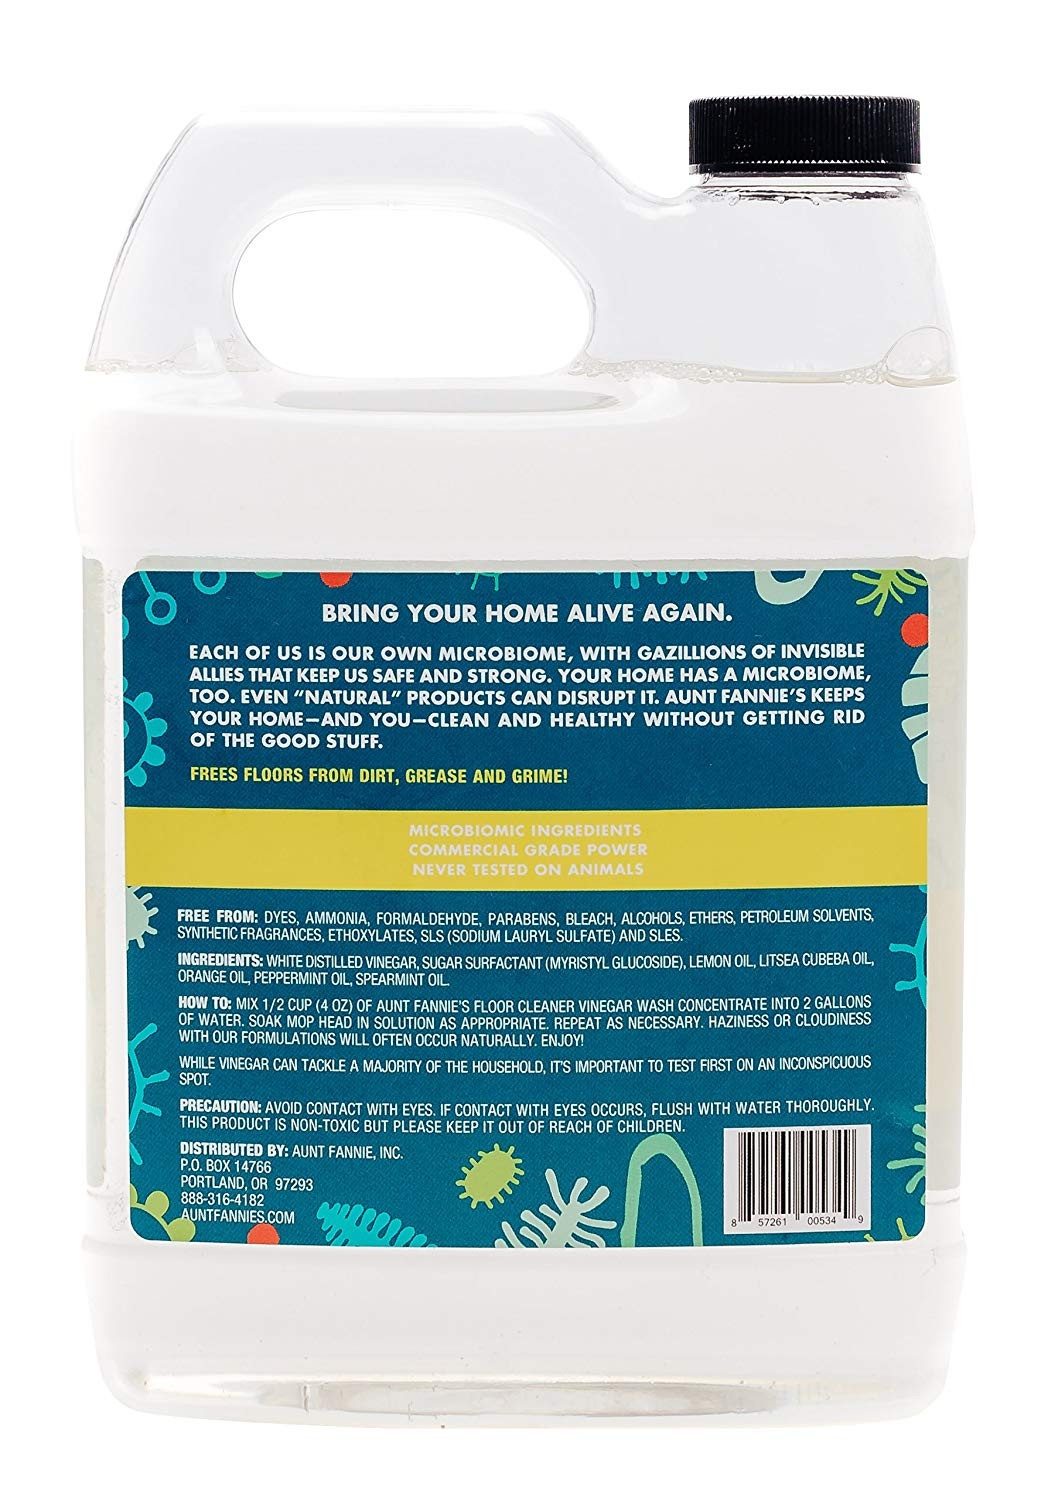 27 attractive How to Clean Hardwood Floors with Vinegar solution 2024 free download how to clean hardwood floors with vinegar solution of amazon com aunt fannies vinegar wash flr clnr mnt 32oz grocery pertaining to amazon com aunt fannies vinegar wash flr clnr mnt 32oz groc